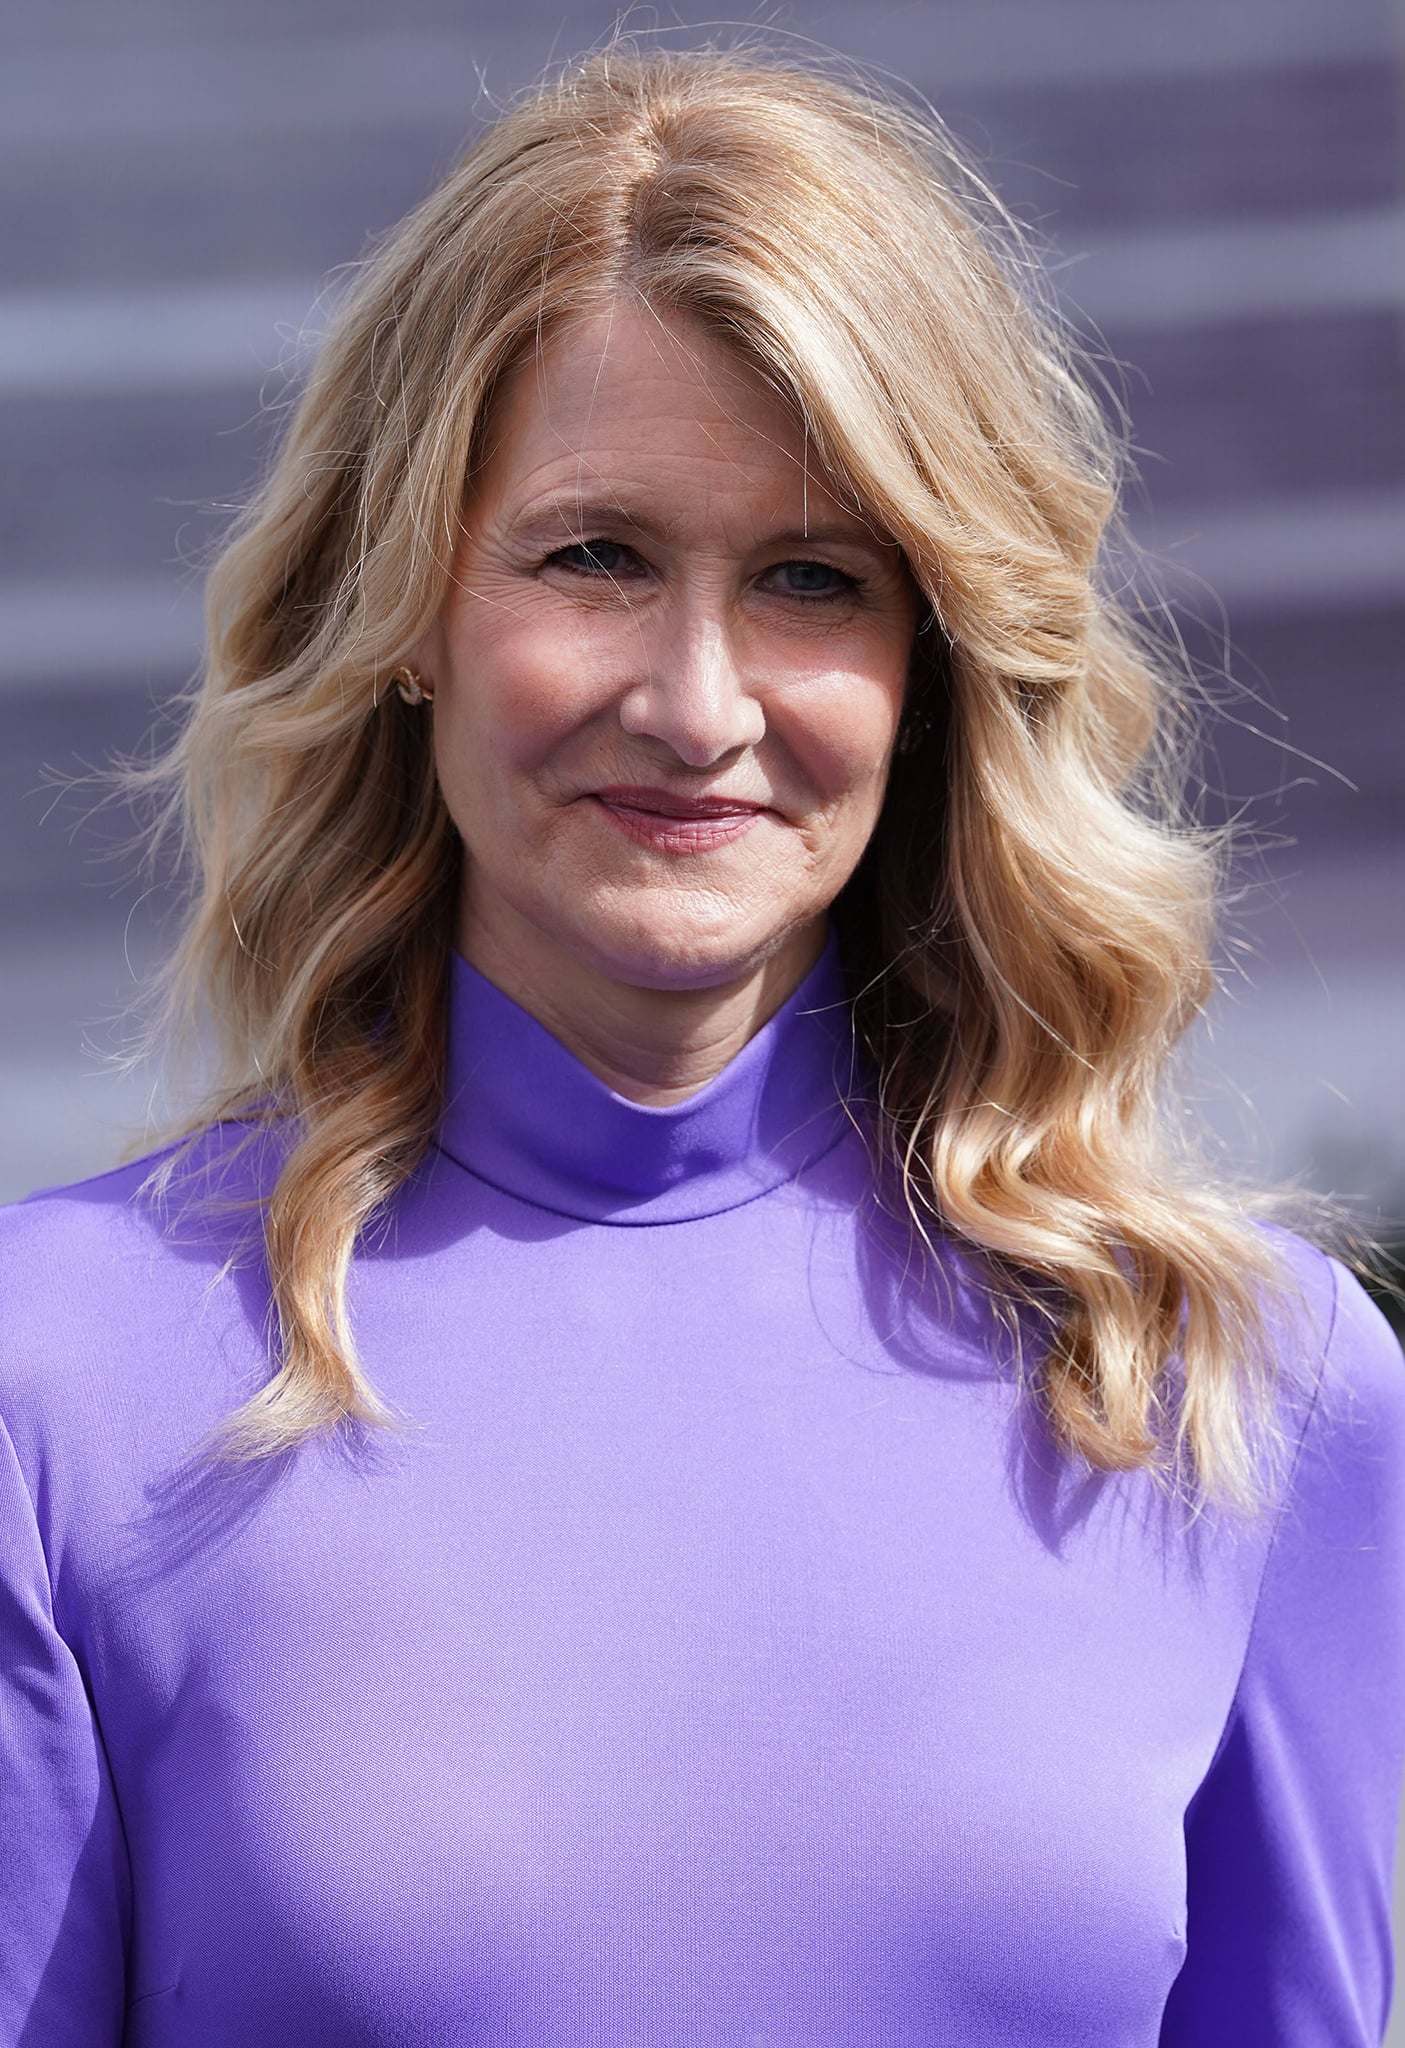 Laura Dern wears her signature curls with light, neutral-colored makeup to enhance her features